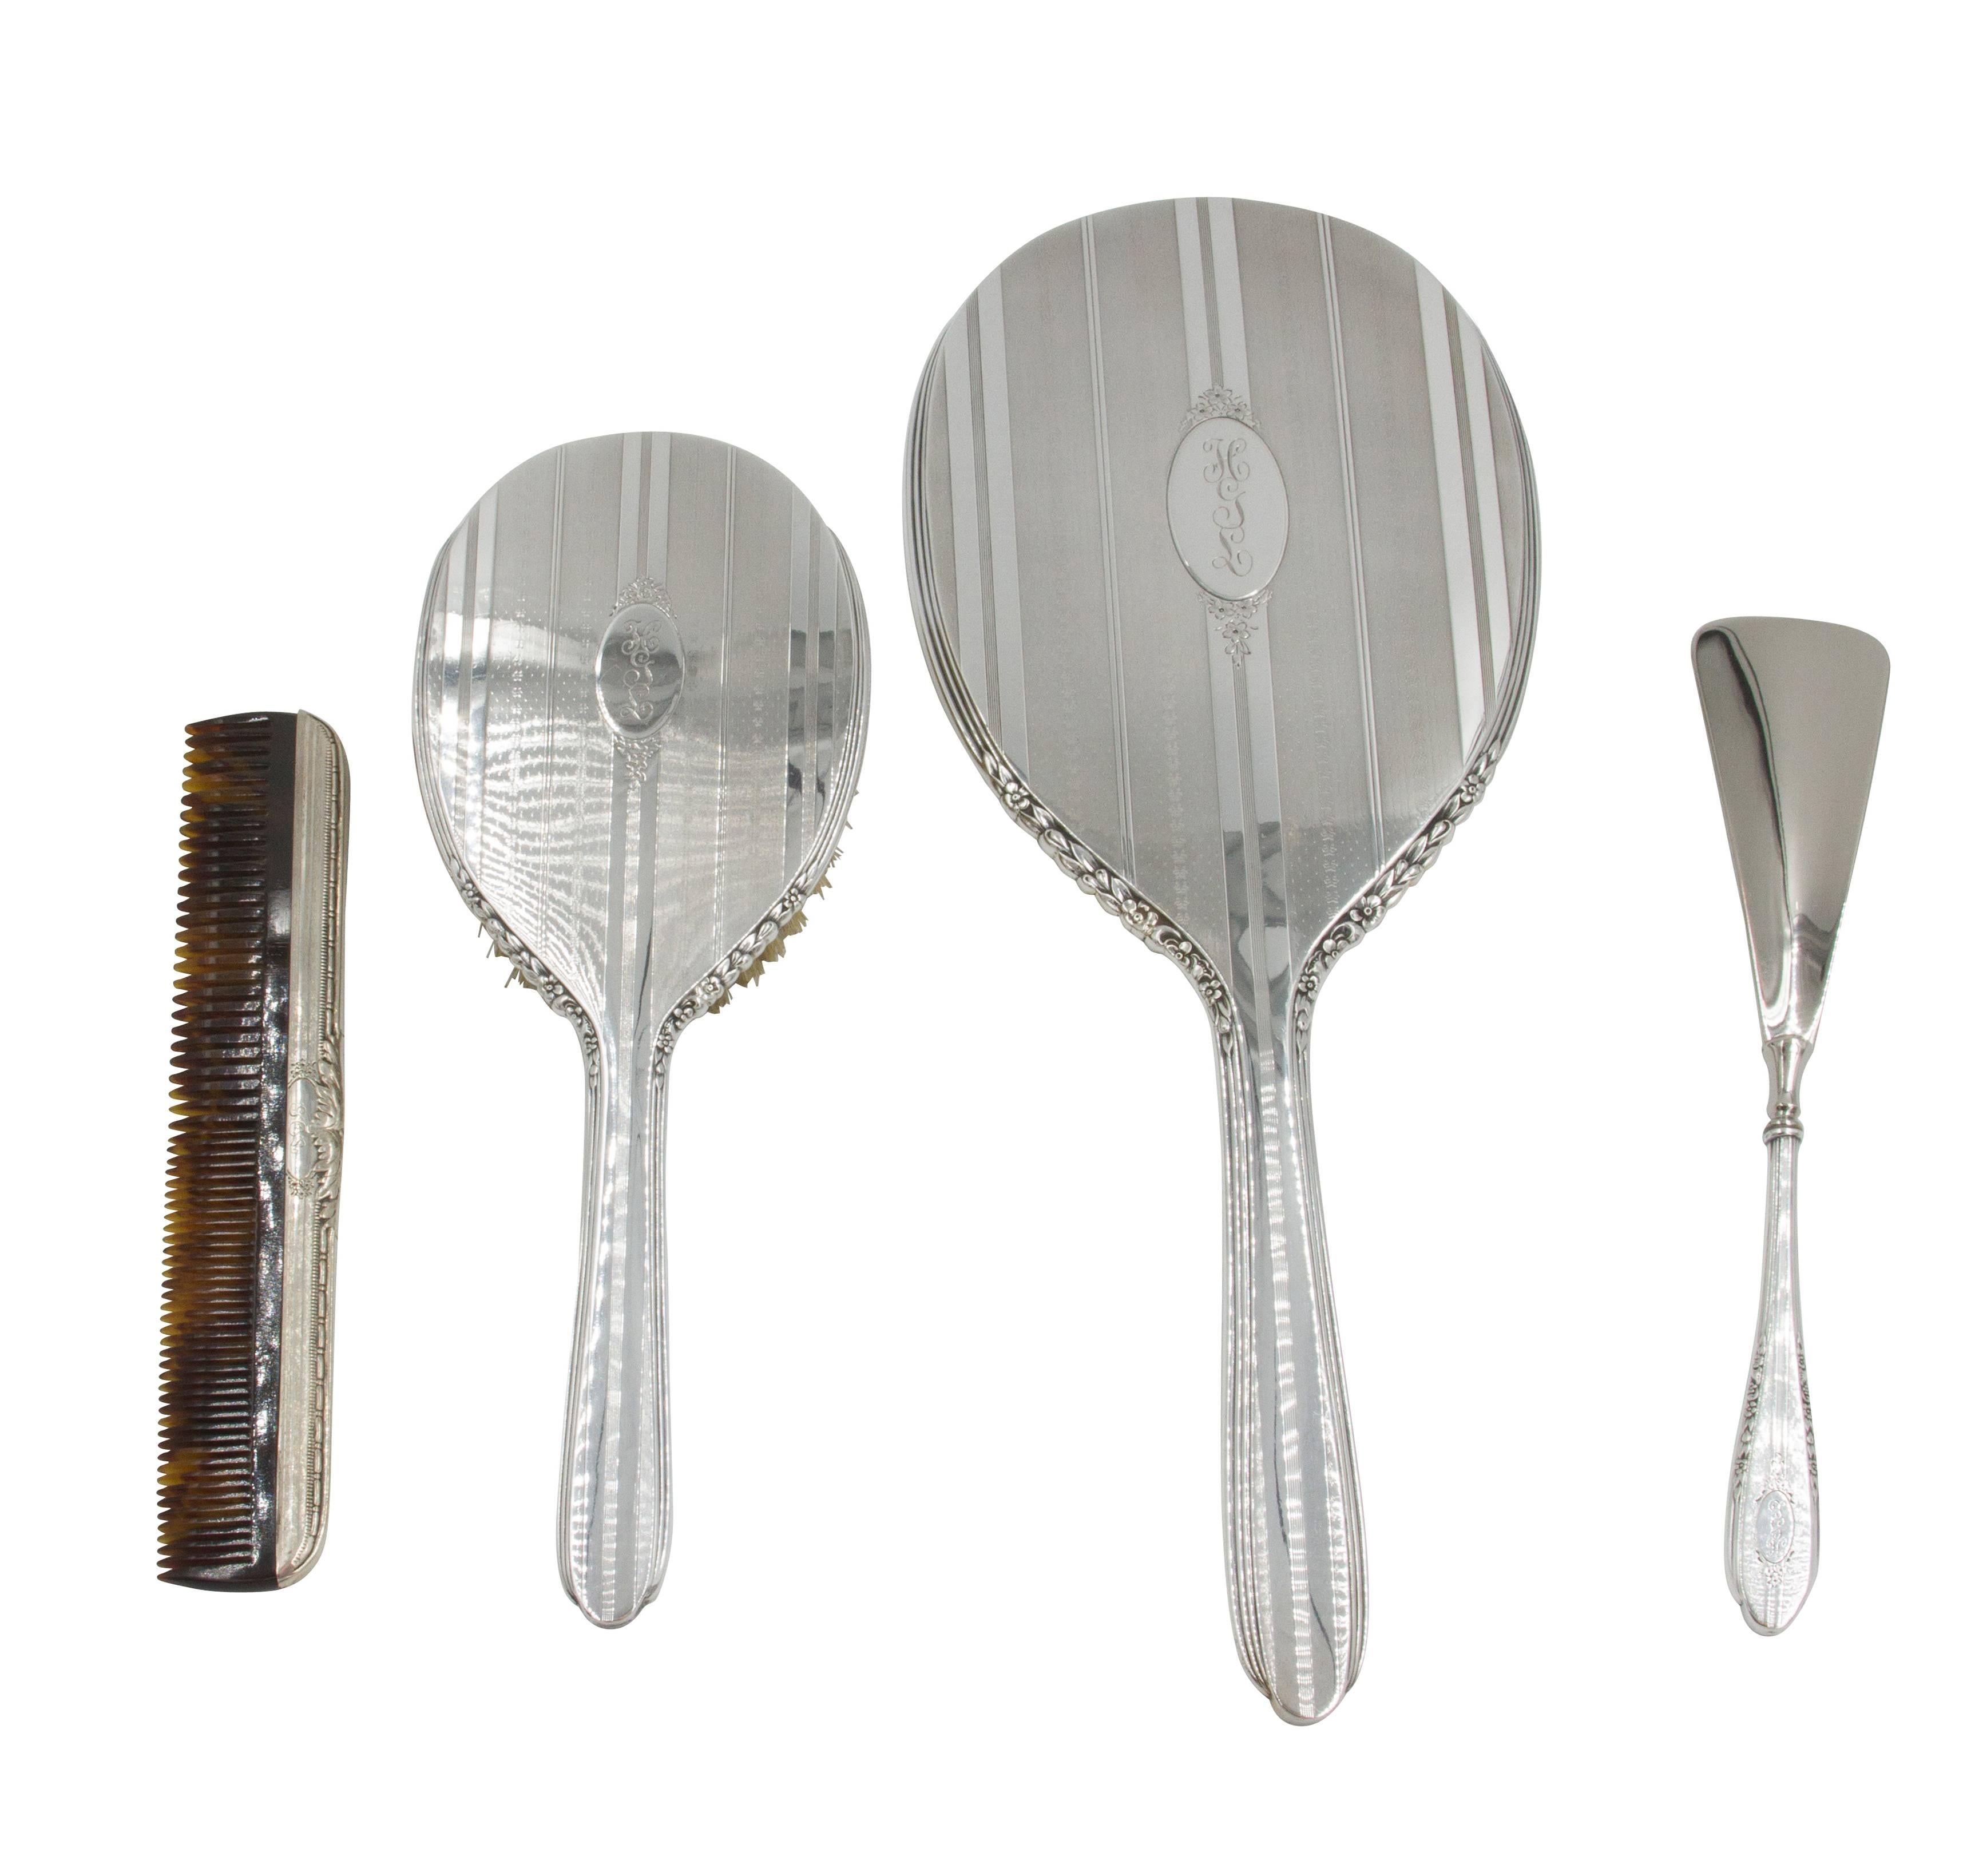 Being offered is a complete ladies vanity set in an Art Deco pattern. Pieces include; hand mirror and brush, large crystal powder jar, shoe Horn, nail file and buffer, new tortoiseshell comb, three brushes (two round and one oval). The silver has a